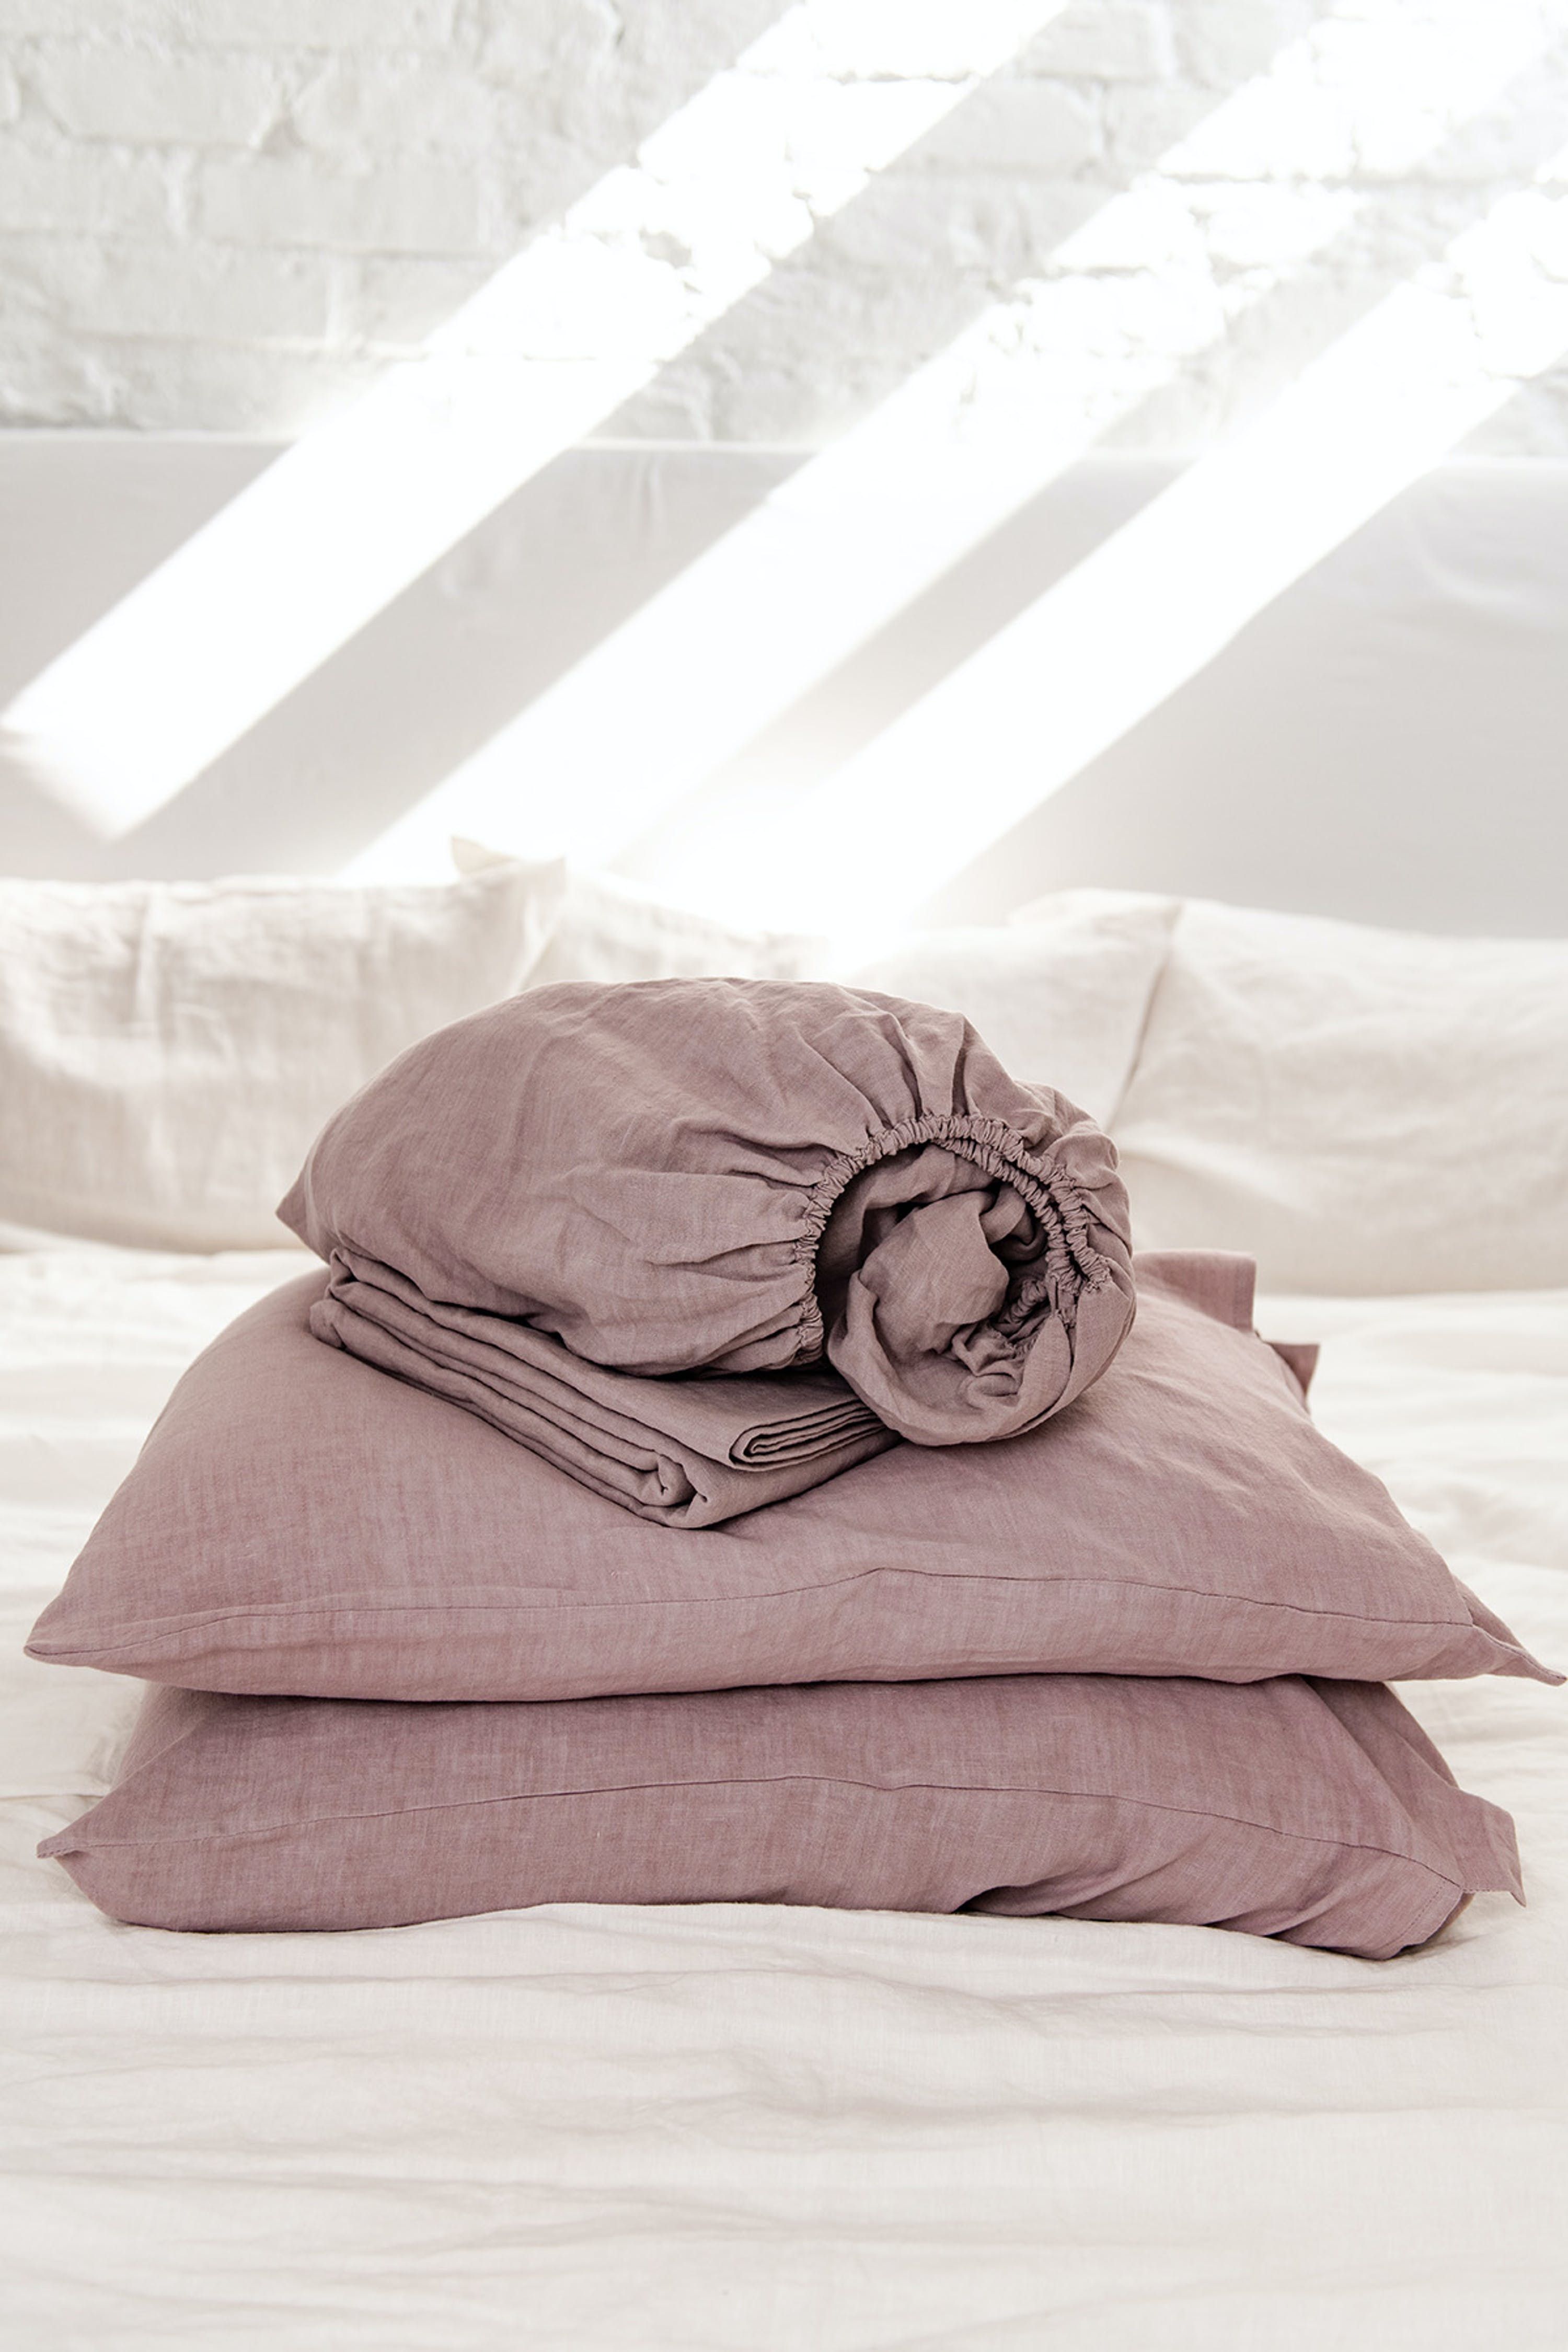 Linen Sheets Set In Beige - US FULL / DOUBLE DEEP + QUEEN PILLOWCASES - Also in: US KING + KING PILL | Verishop